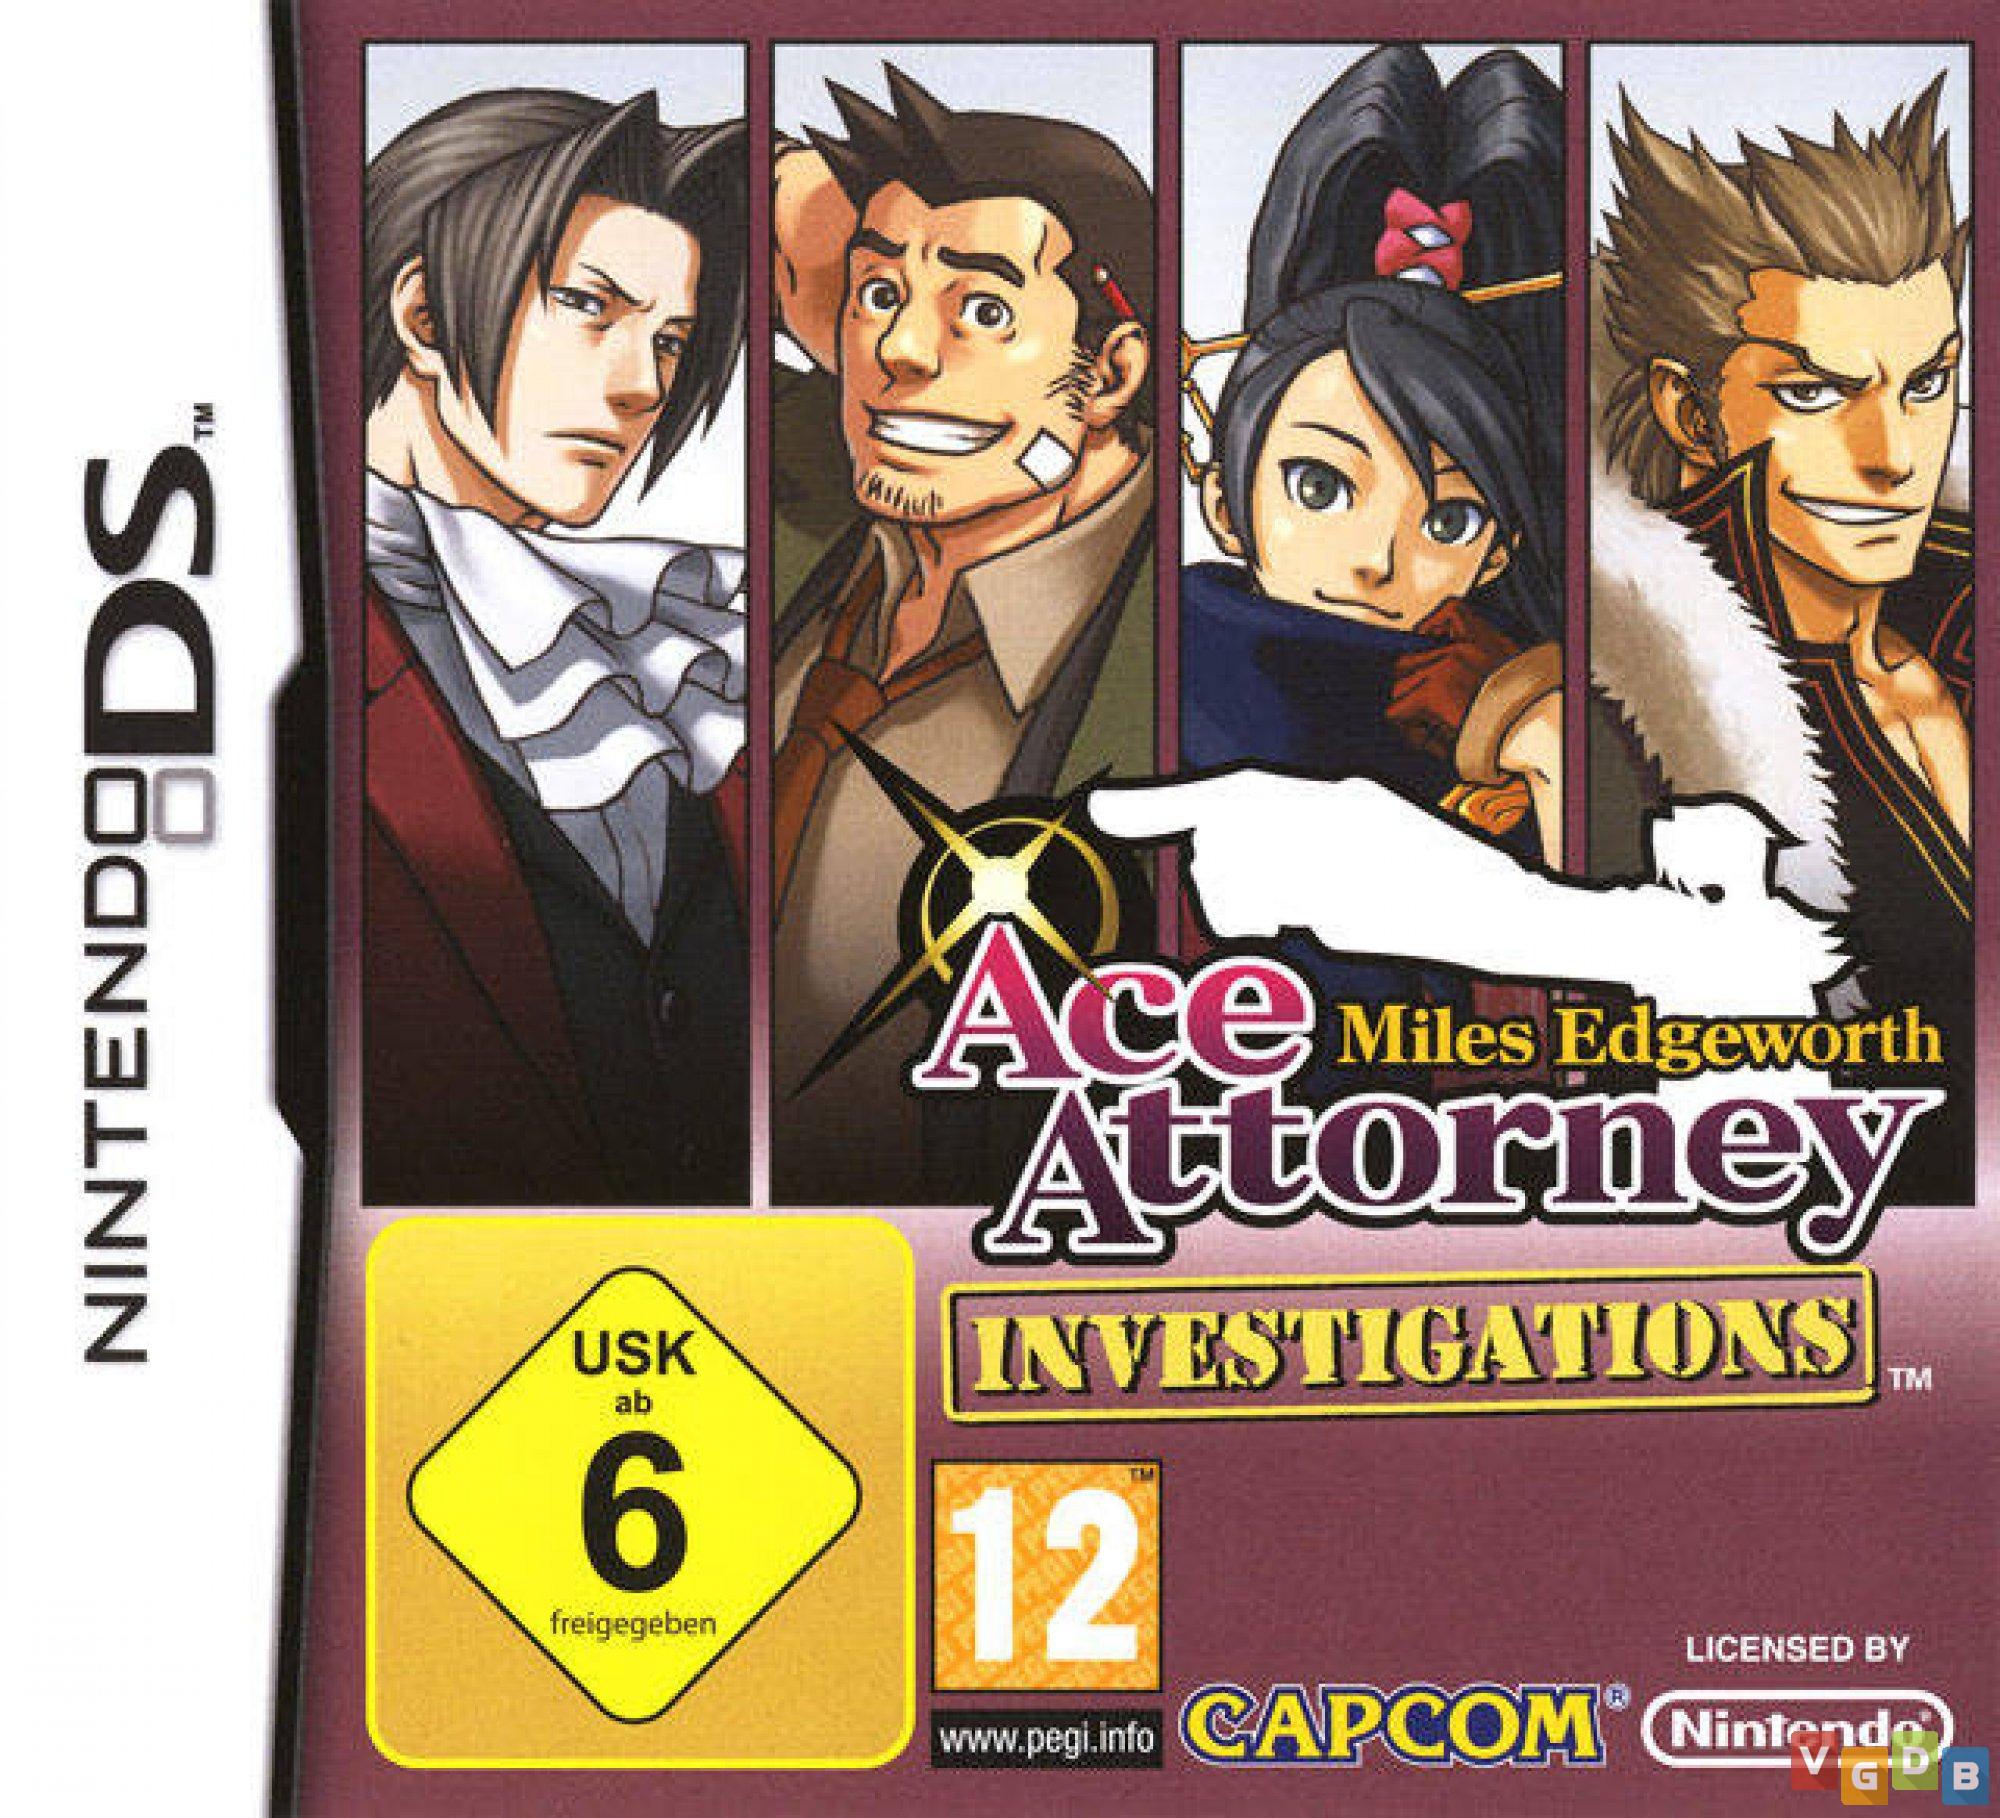 Ace attorney miles. Ace attorney investigations: Miles Edgeworth обложка. Ace attorney investigations. Ace attorney Nintendo DS. Эйс атторни Майлз.